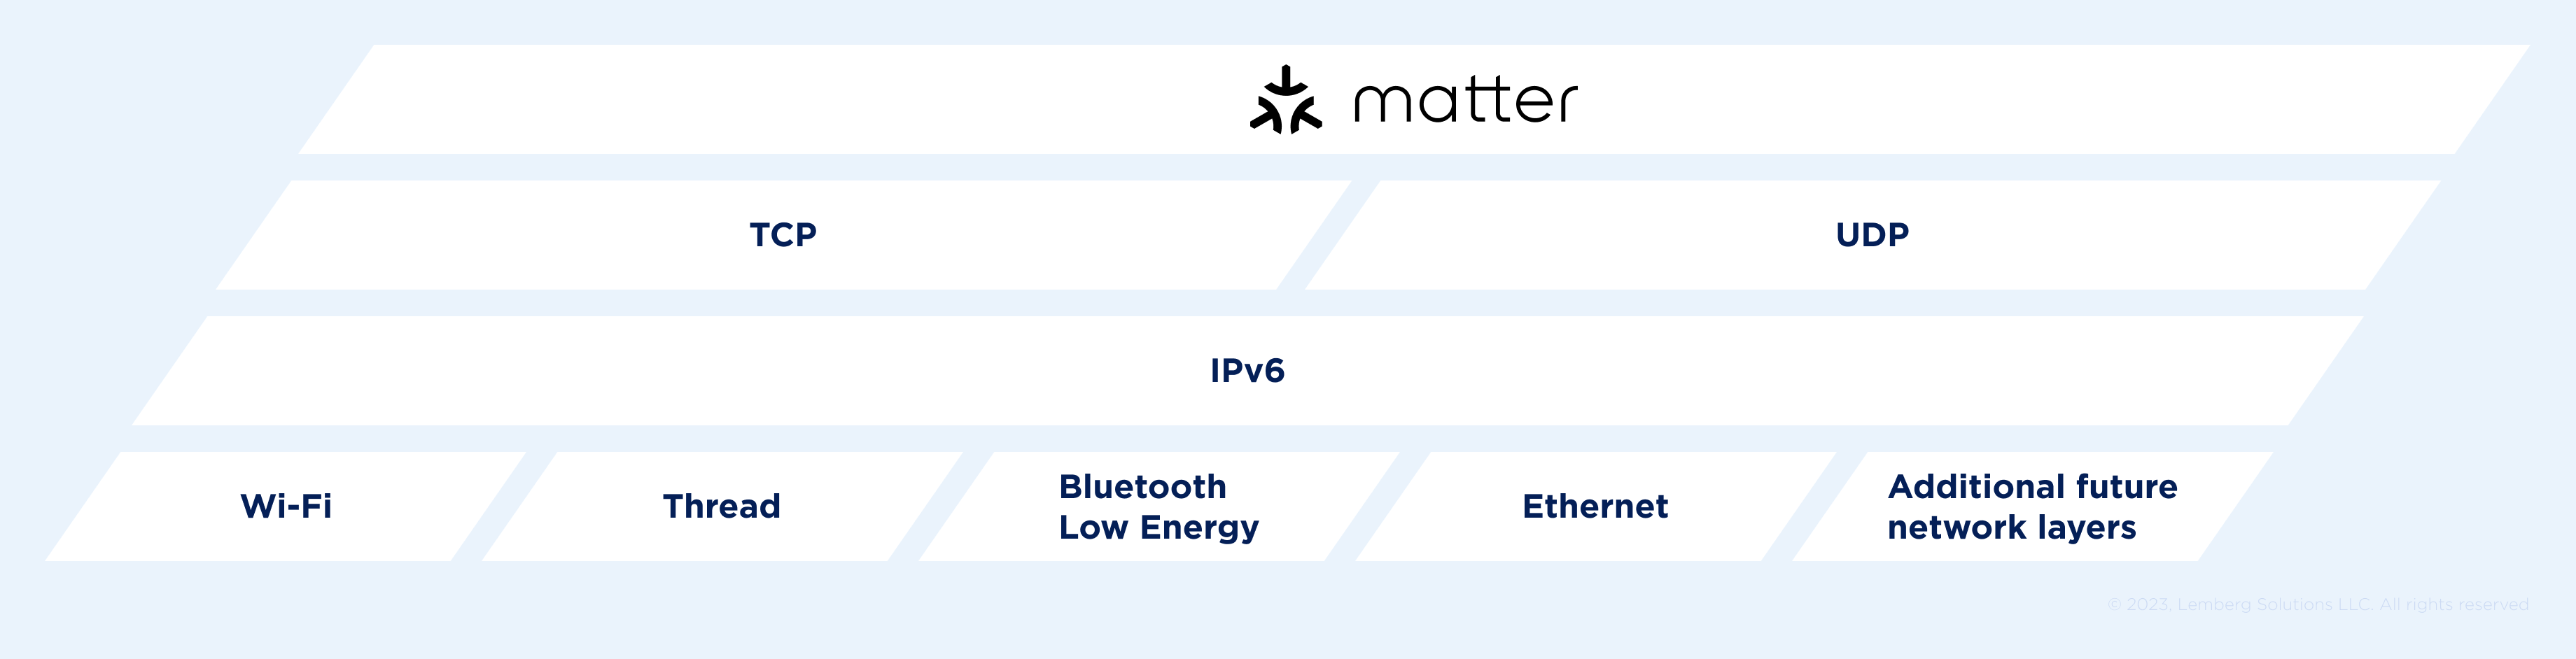 Matter Protocol for Smart Home Industry - How does Matter work - Lemberg Solutions